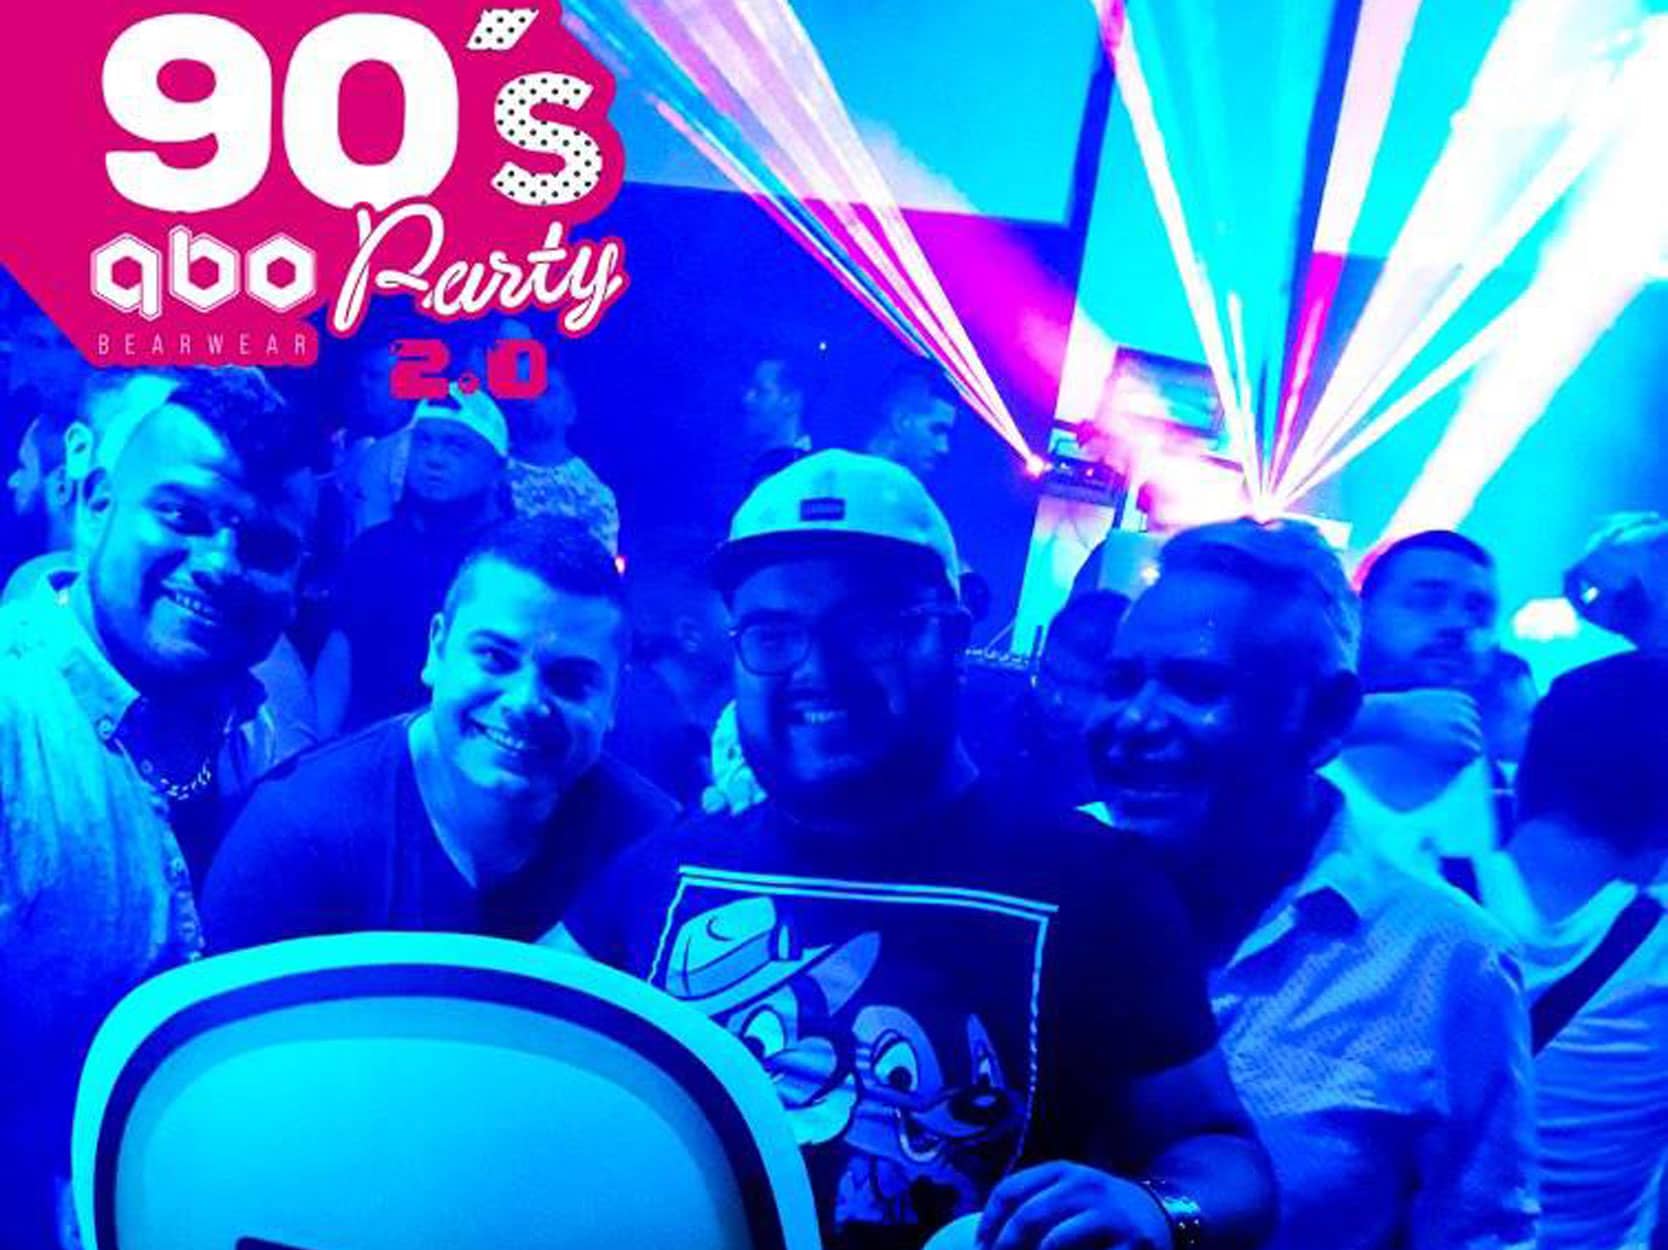 90's Qbo Party 2